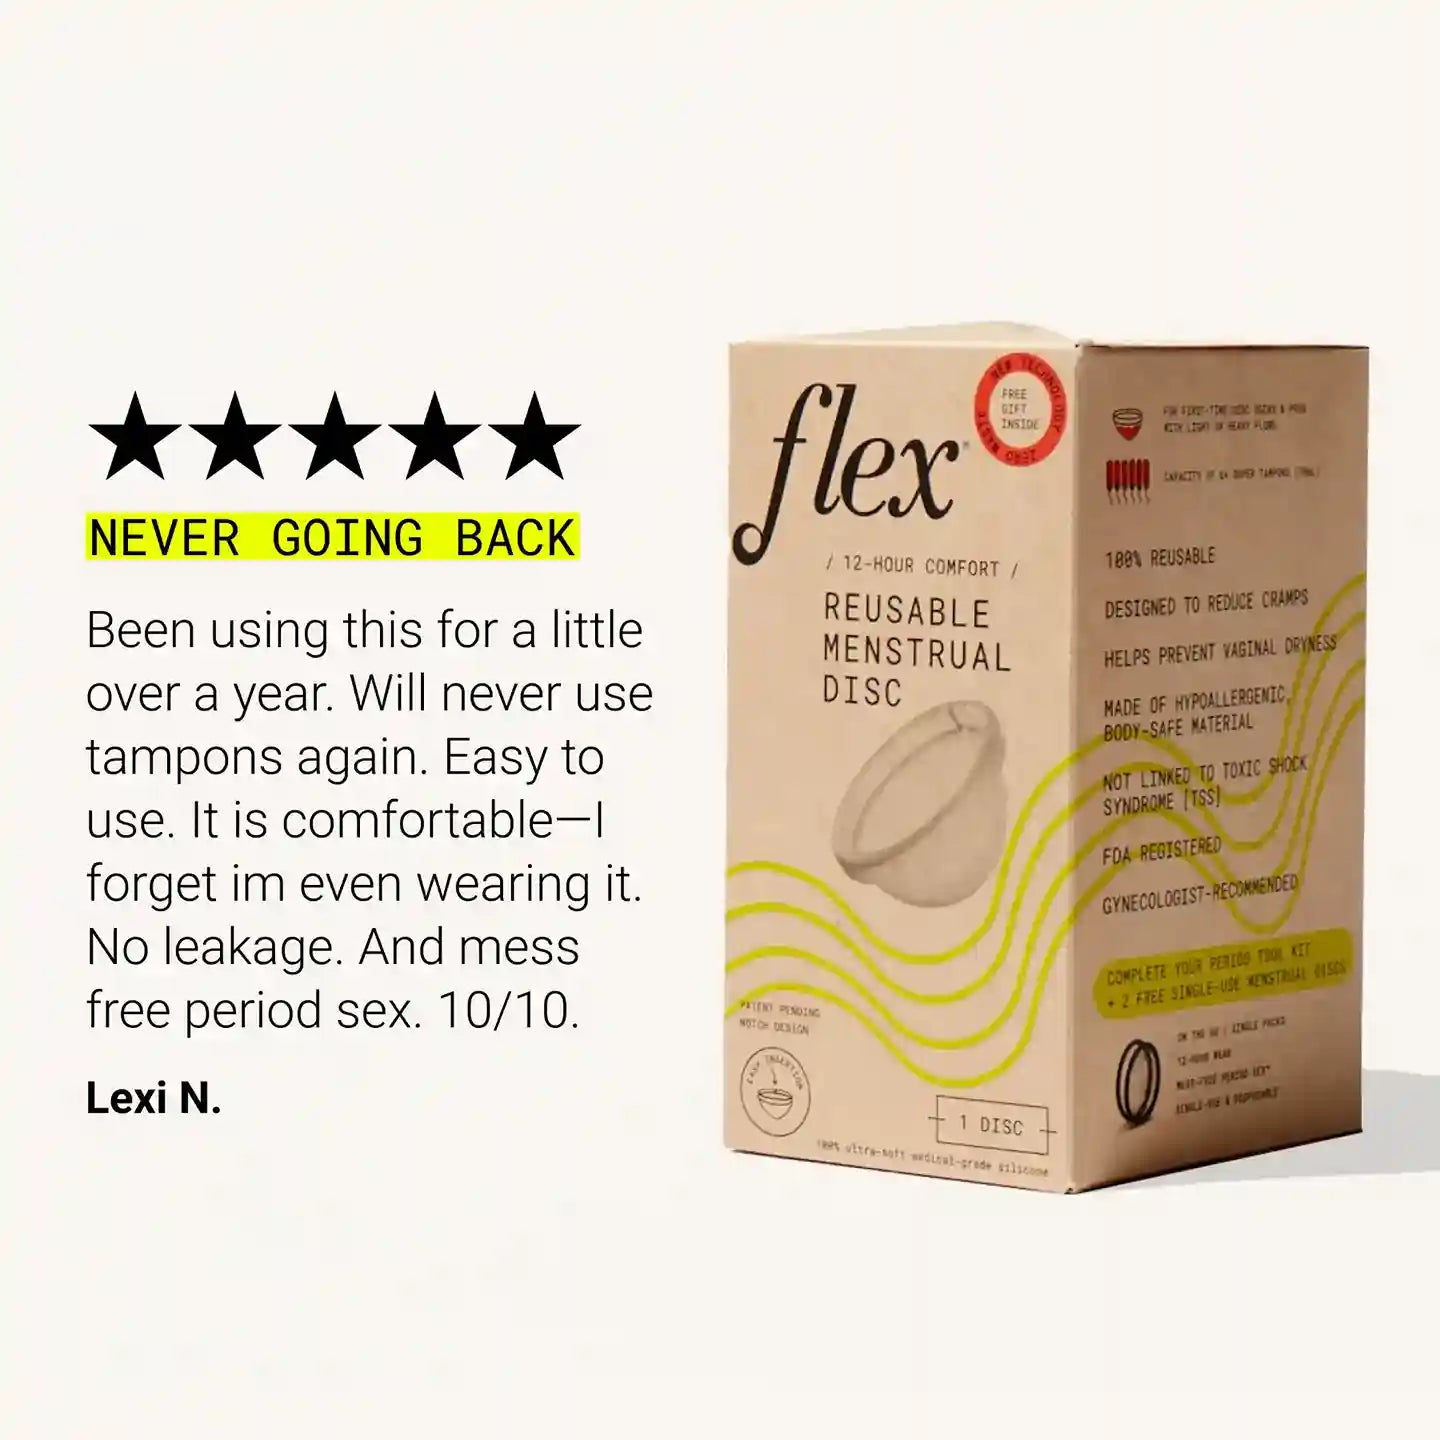 Flex is the Menstrual Cup That Lets You Have Mess-Free Period Sex